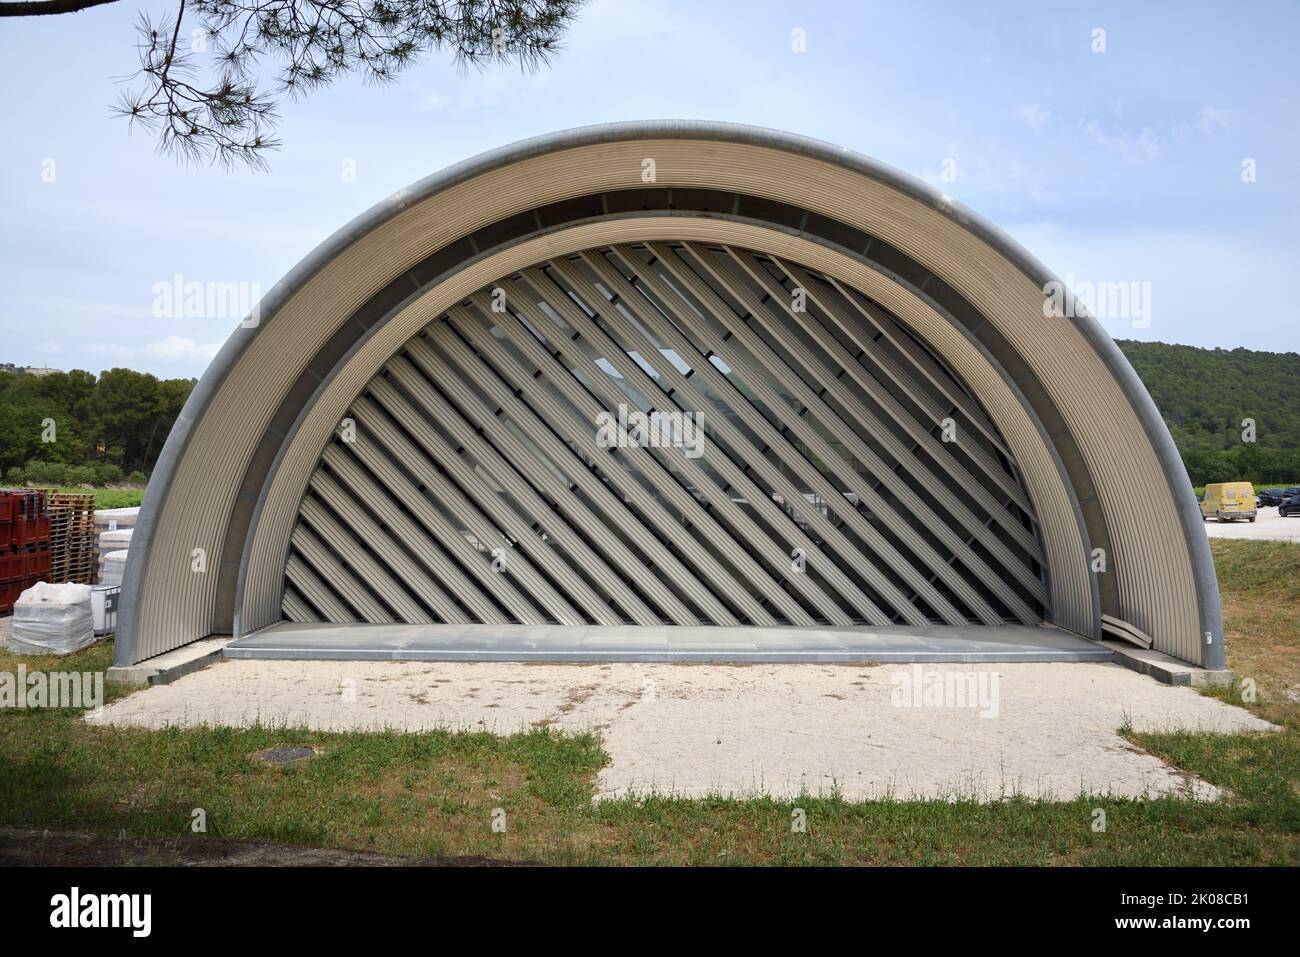 Semi-circular or cylindrical steel Wine Cellars or Winery designed by Jean Nouvel in 2008 at Domaine La Coste or Chateau La Coste Provence France Stock Photo